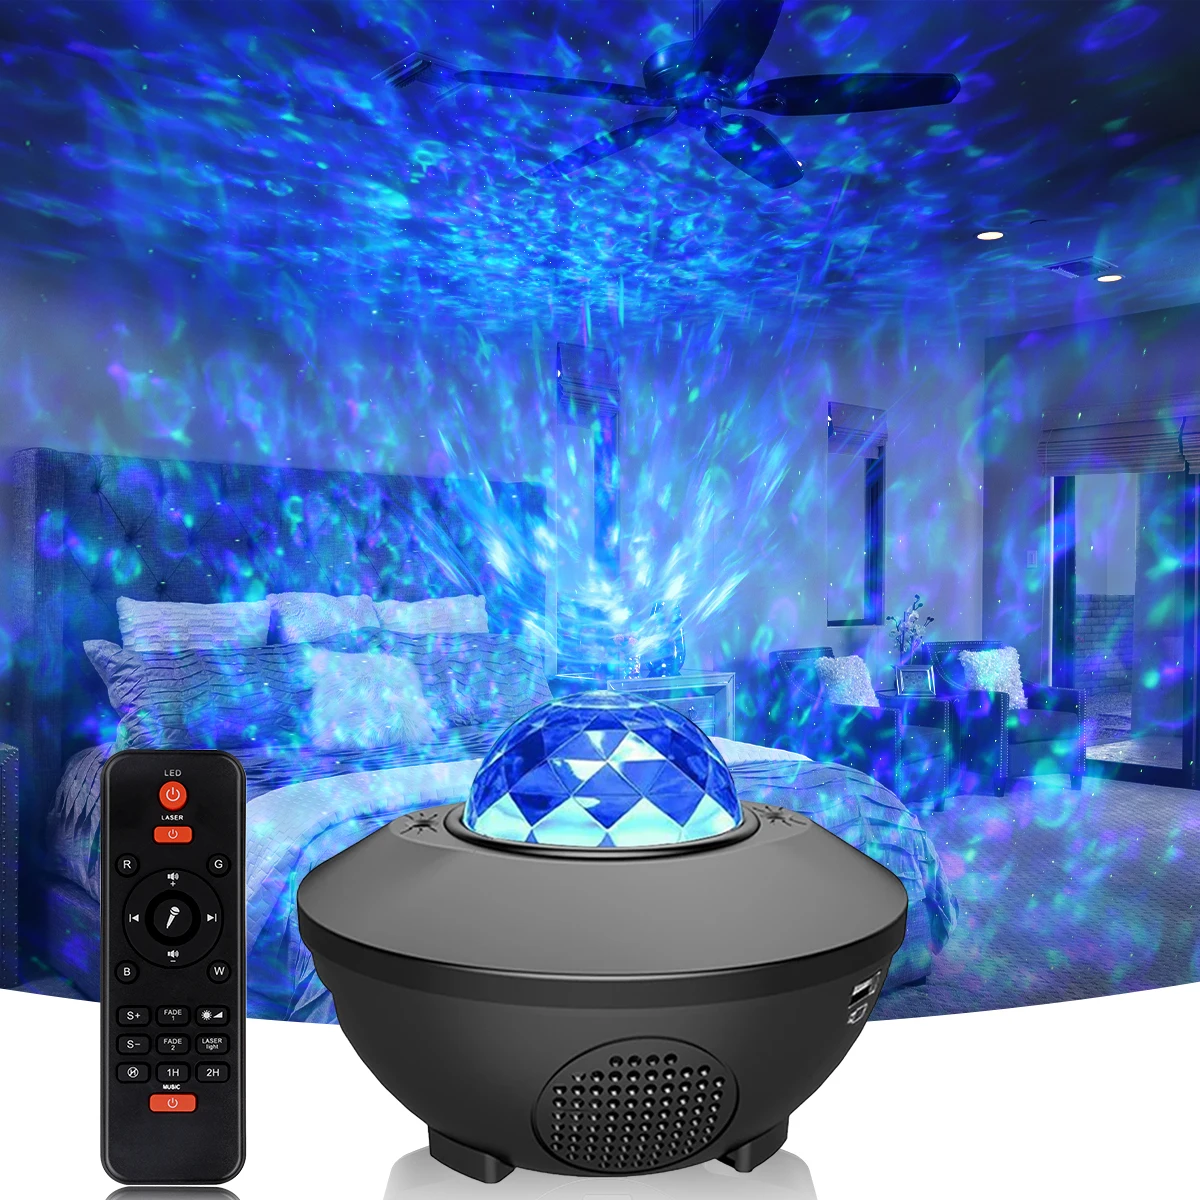 

LED Star Galaxy Projector Ocean Wave Night Light Room Decor Rotate Starry Sky Projectors Romantic Decoration Bedroom Lamp Gifts